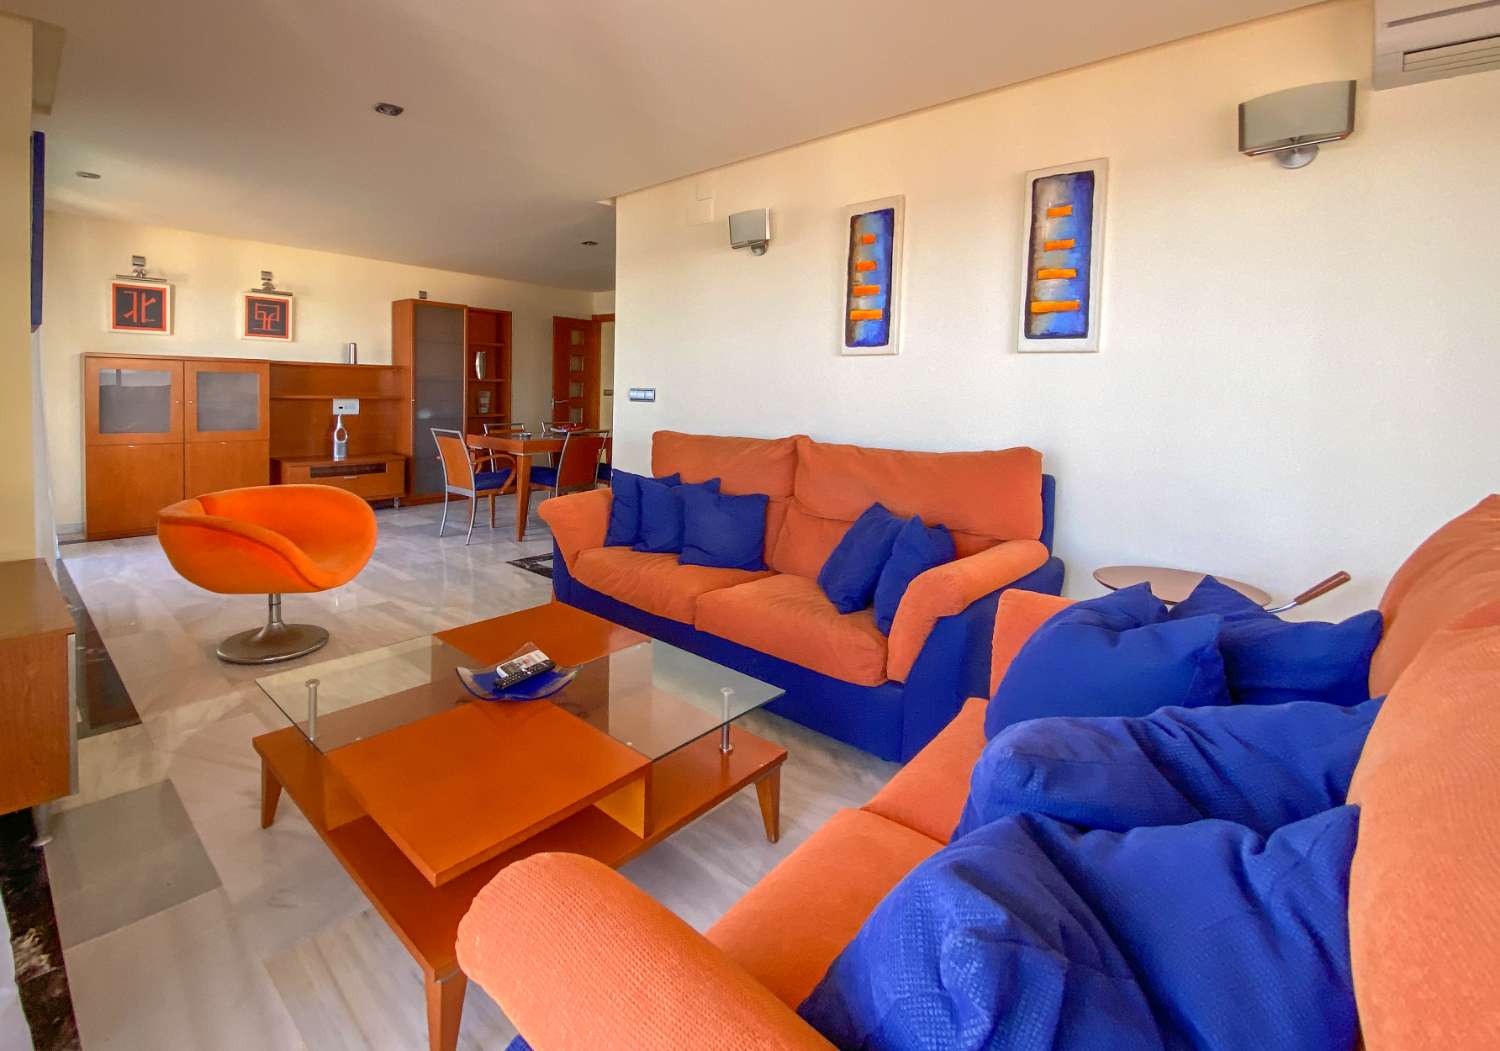 Incredible Sea Front Apartment with Large Terrace of 300 sqm.